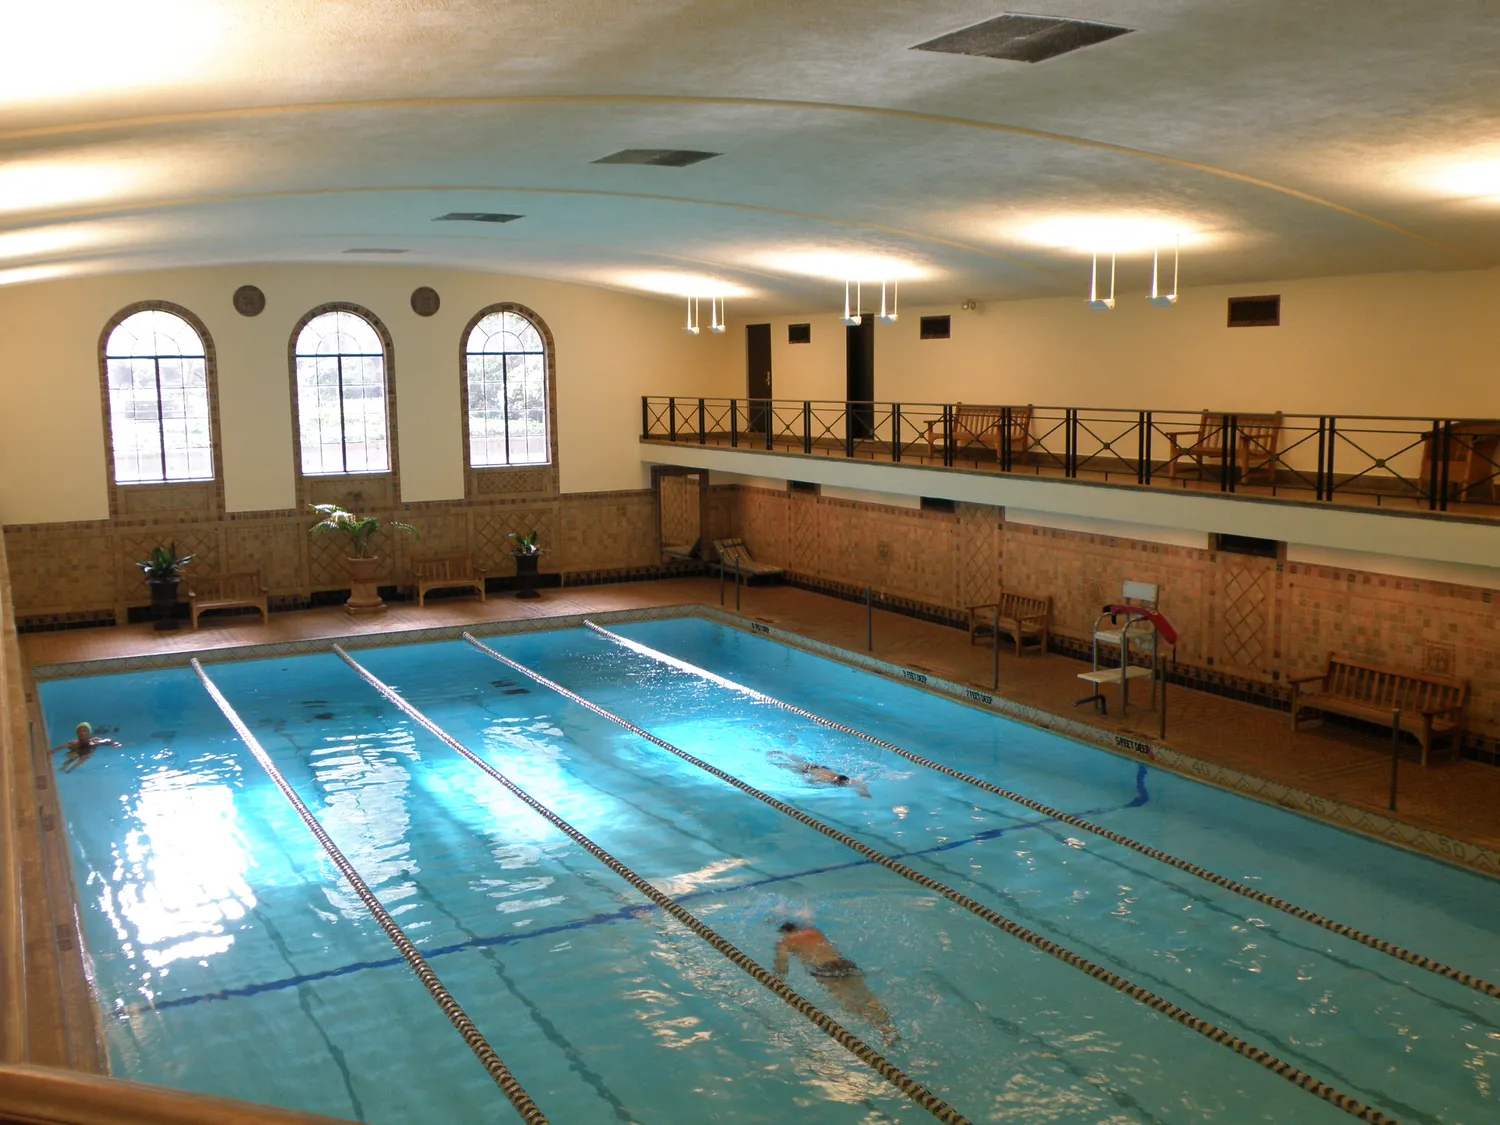  Lovely half Olympic Swimming Pool